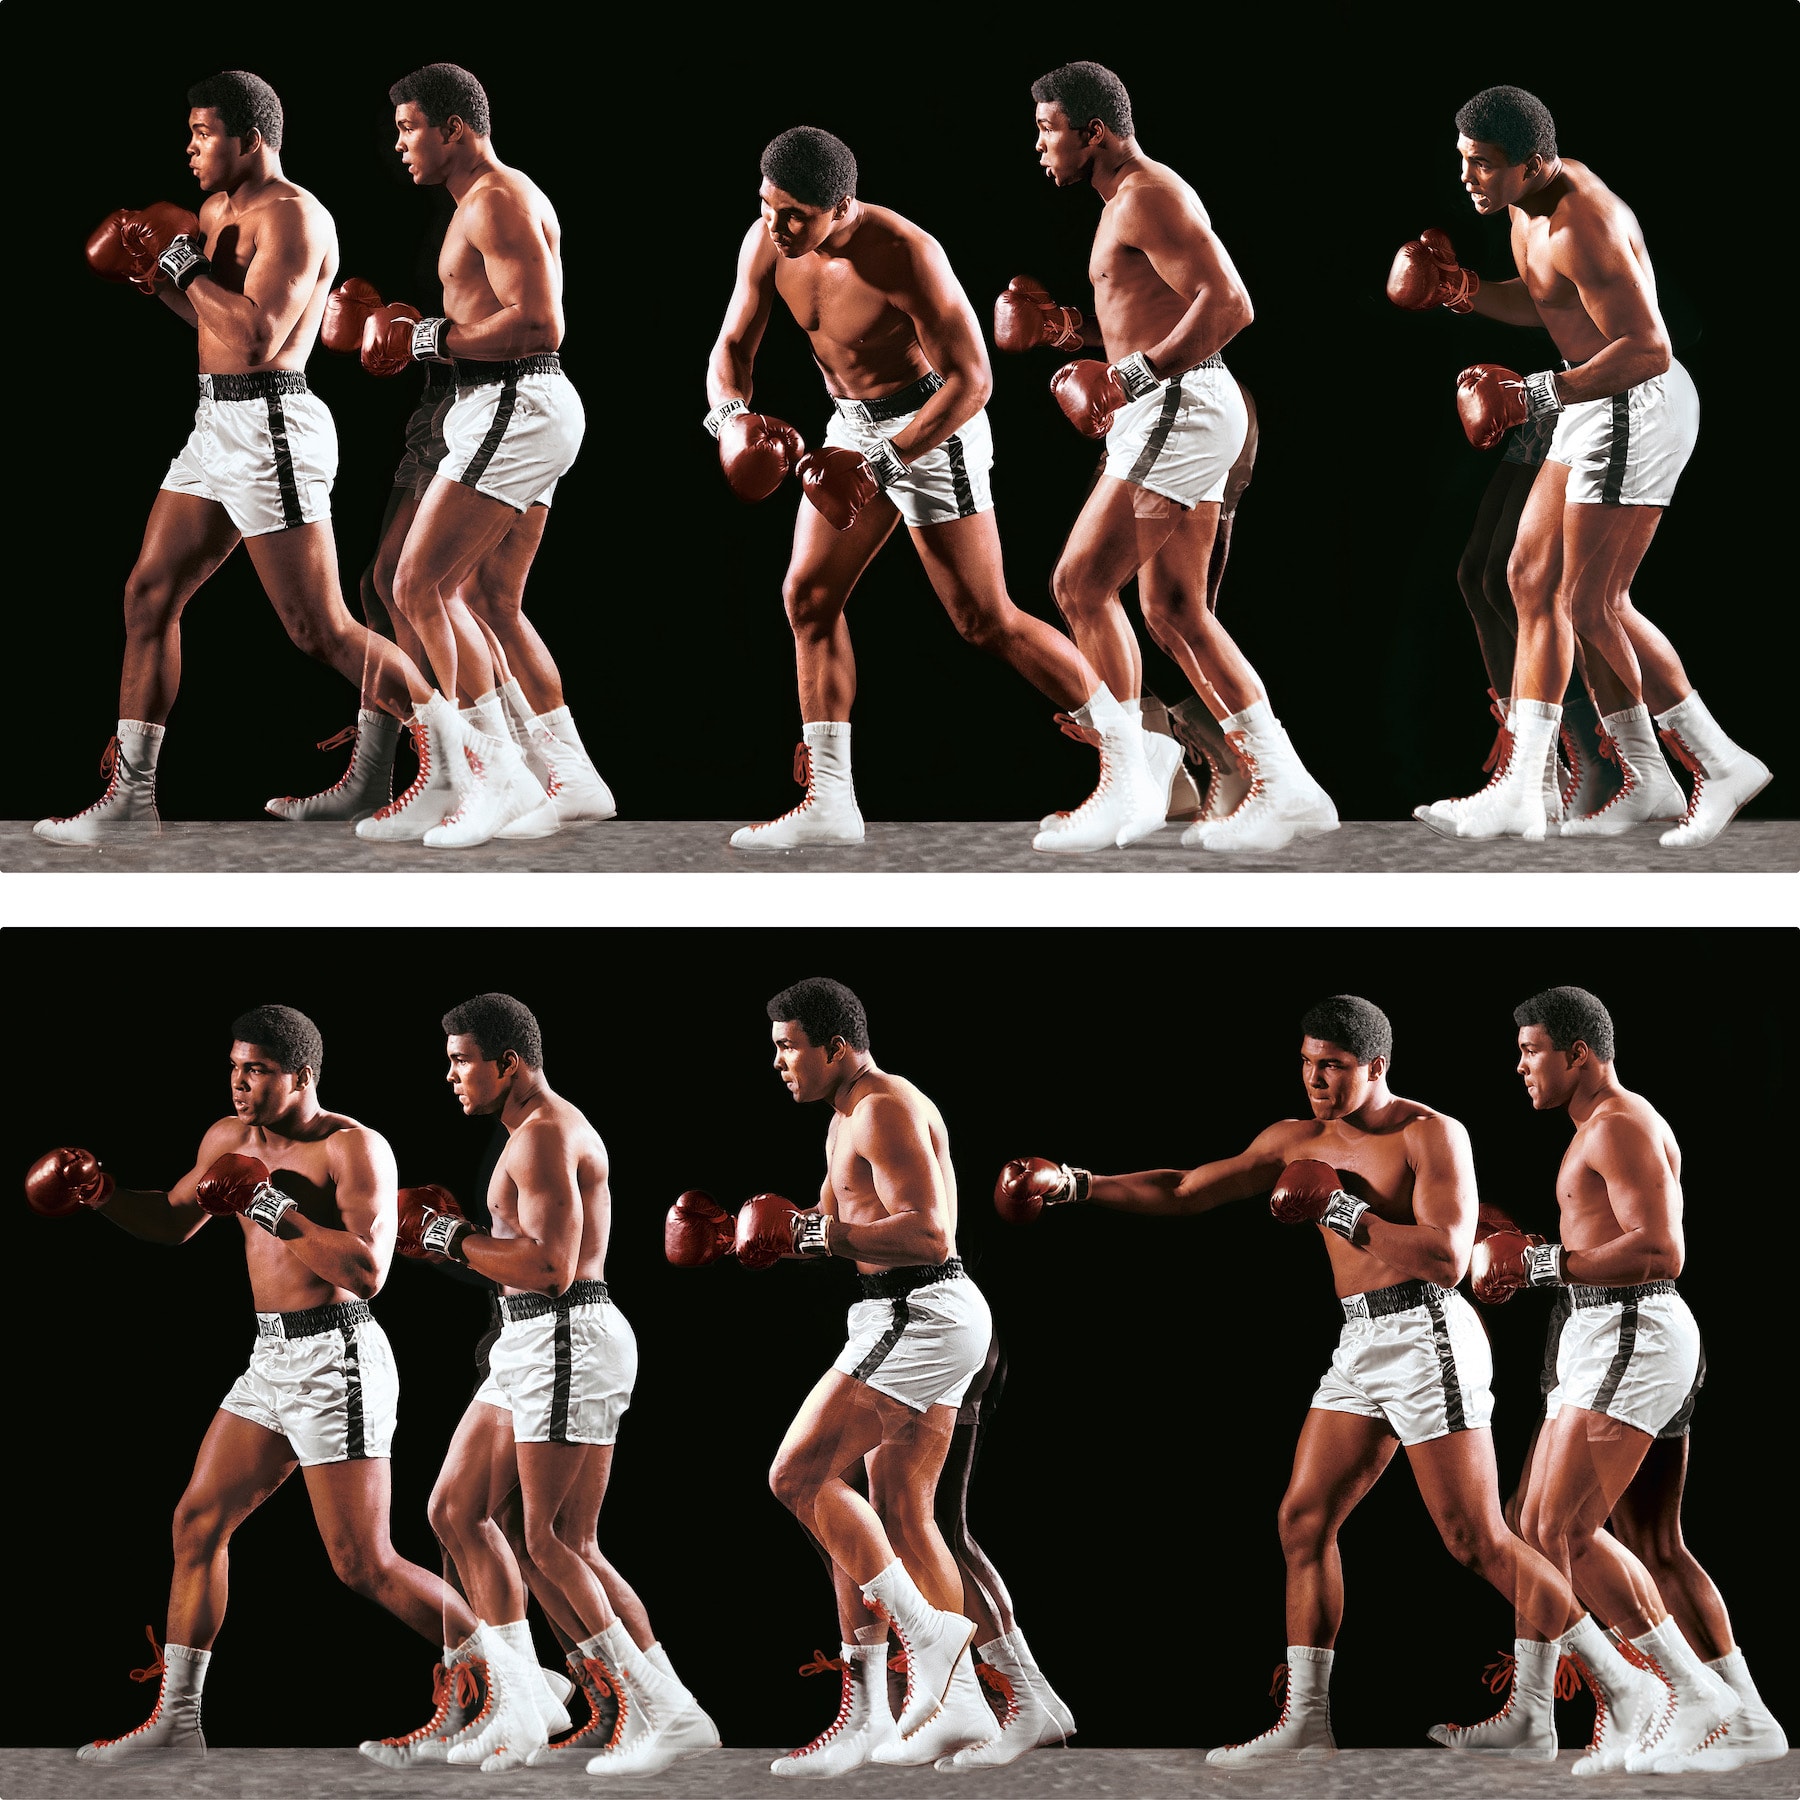 TASCHEN 推出收藏版新书《Neil Leifer. Boxing. 60 Years of Fights and Fighters》